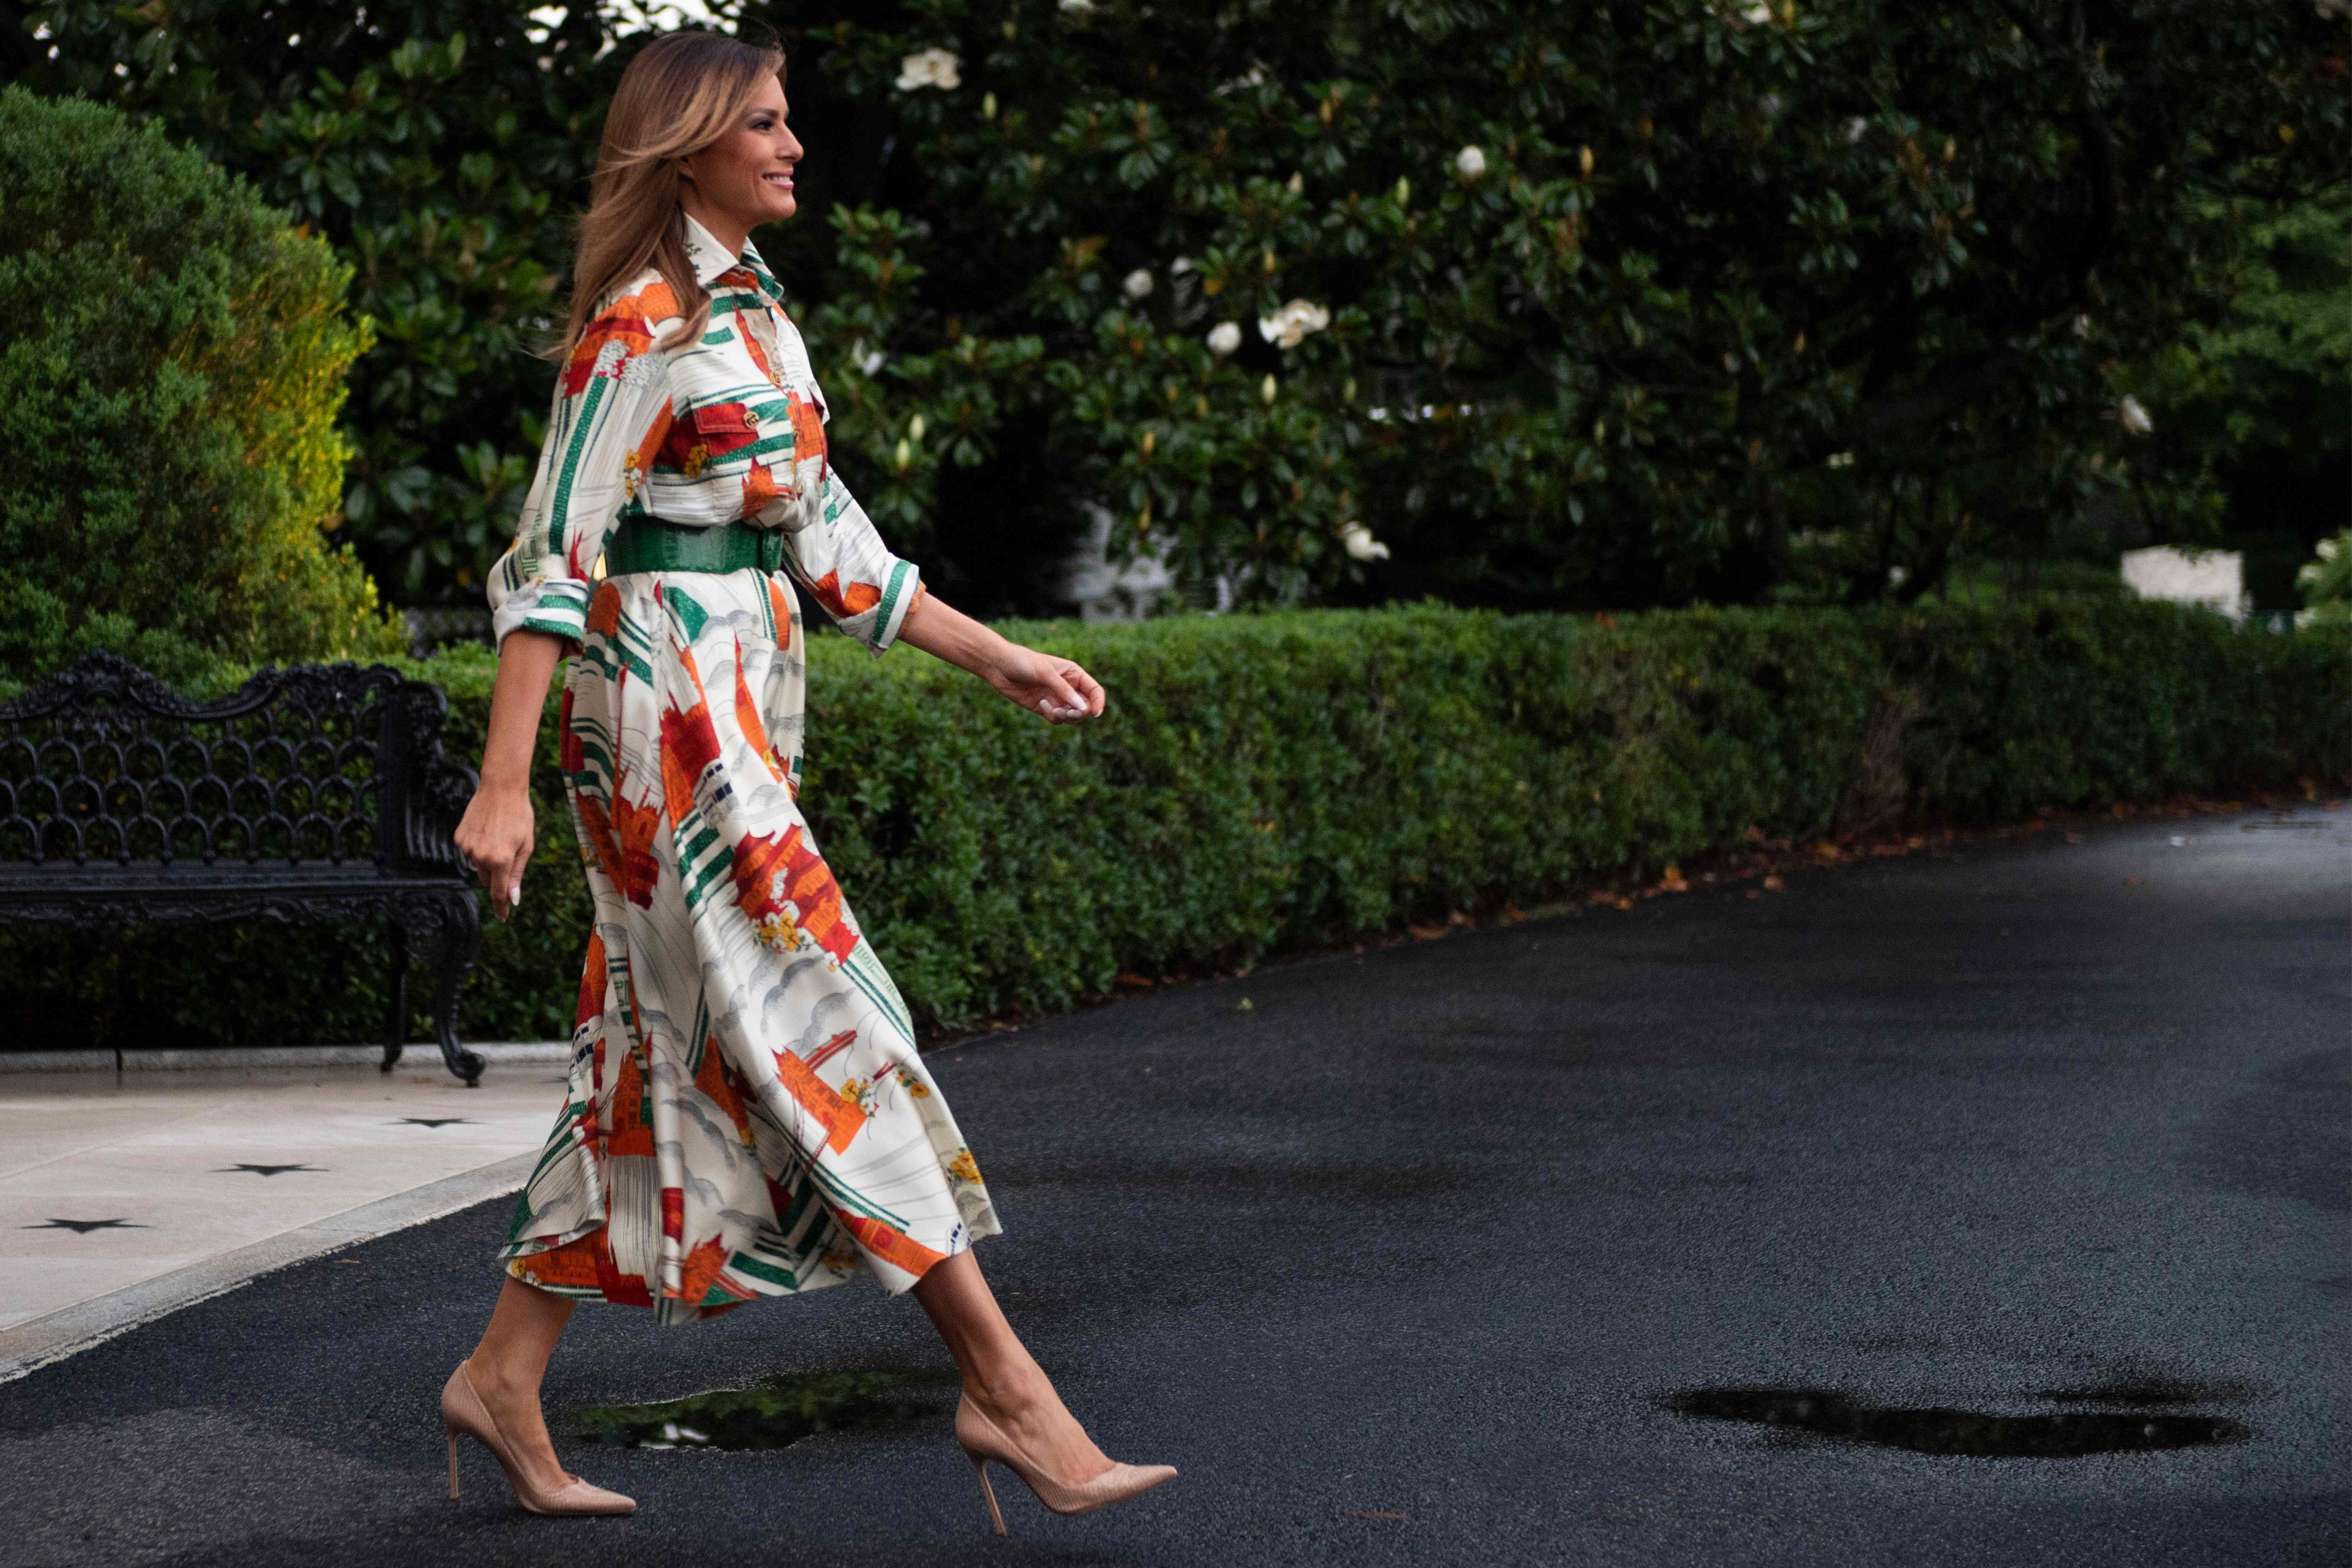  Melania Trump wore a Gucci dress printed with London landmarks on her way to the Capital